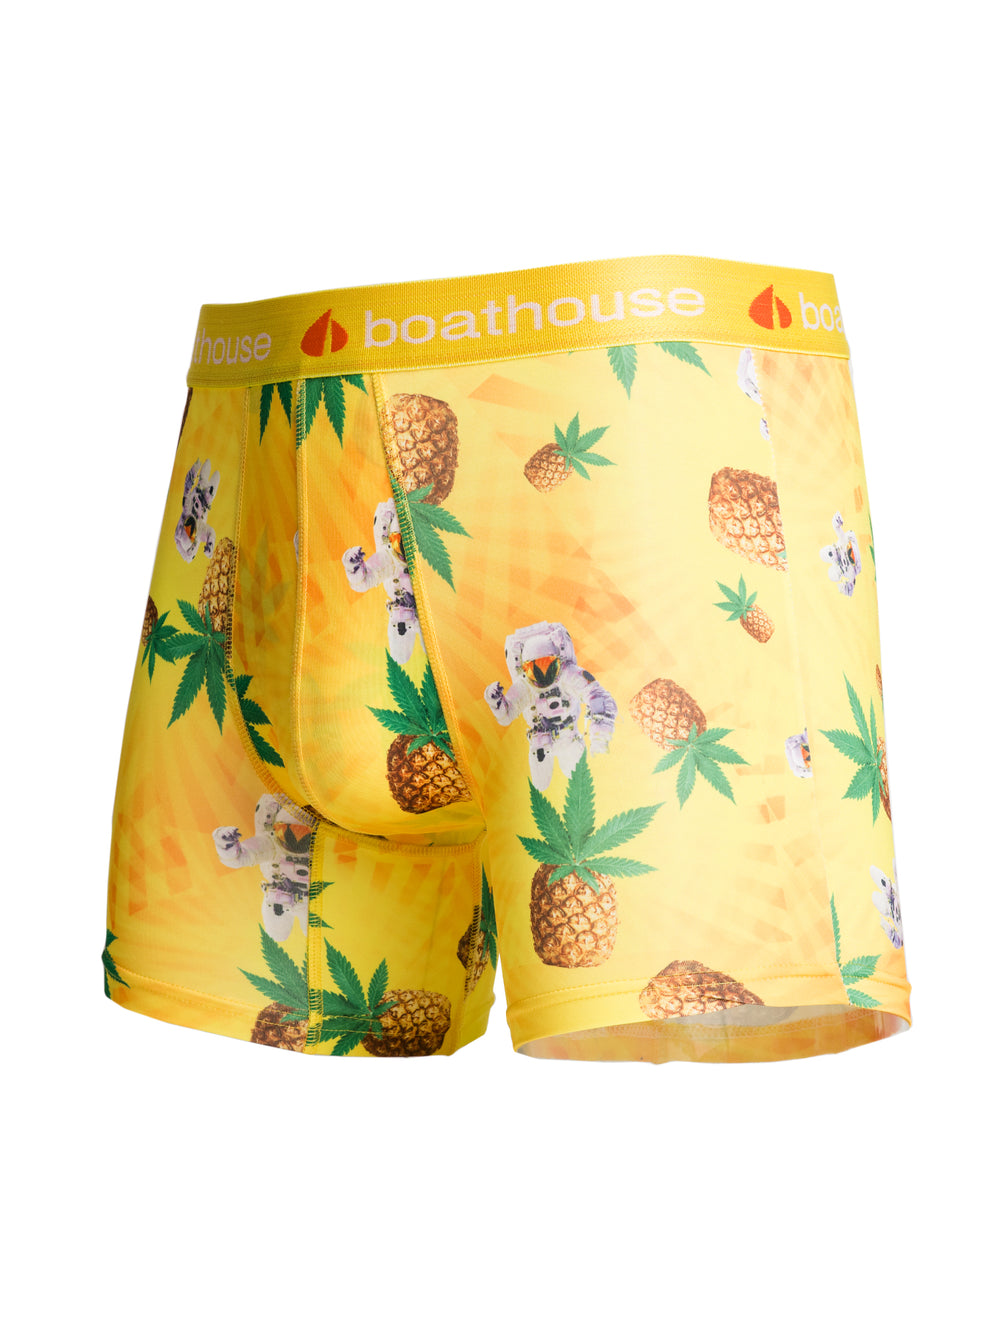 BOATHOUSE NOVELTY BOXER BRIEF - PINEAPPLE WEED - CLEARANCE